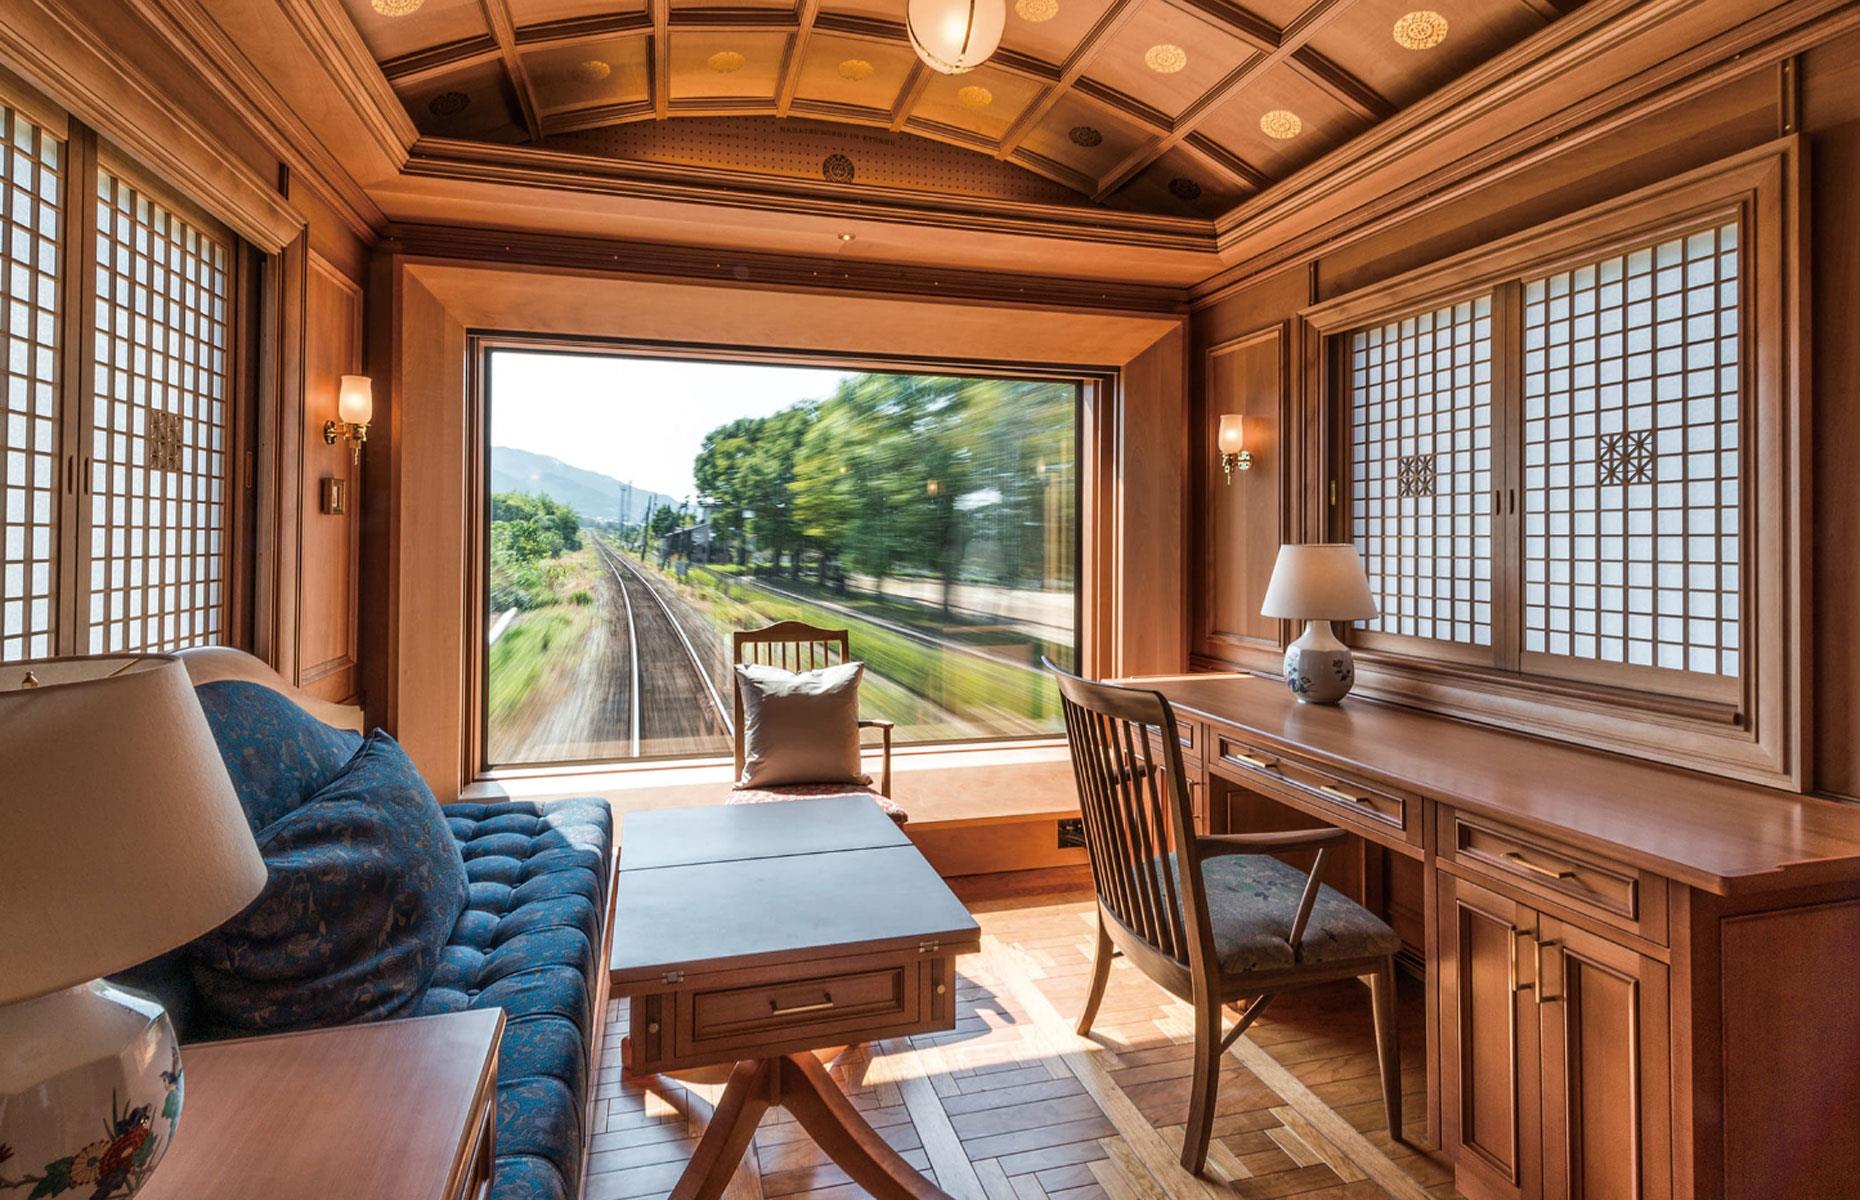 <p>A ravishing fusion of Japanese and Western design, the wood-panelled carriages include a dining car serving epicurean delights from the region, a piano lounge, and a traditional Japanese tea room.</p>  <p>The train's two Deluxe Suites are the most expensive, so naturally the hardest to secure. The larger of the pair is 226 square feet (21 square metres) and features a lounge area, sleeping area, and ensuite bathroom. But the pièce de résistance is most definitely that sensational rear window (shown here). </p>  <p>A Deluxe Suite costs 1.5 million yen per person for a two-day, one-night trip, which equates to a whopping $10,150 (£8,059).</p>